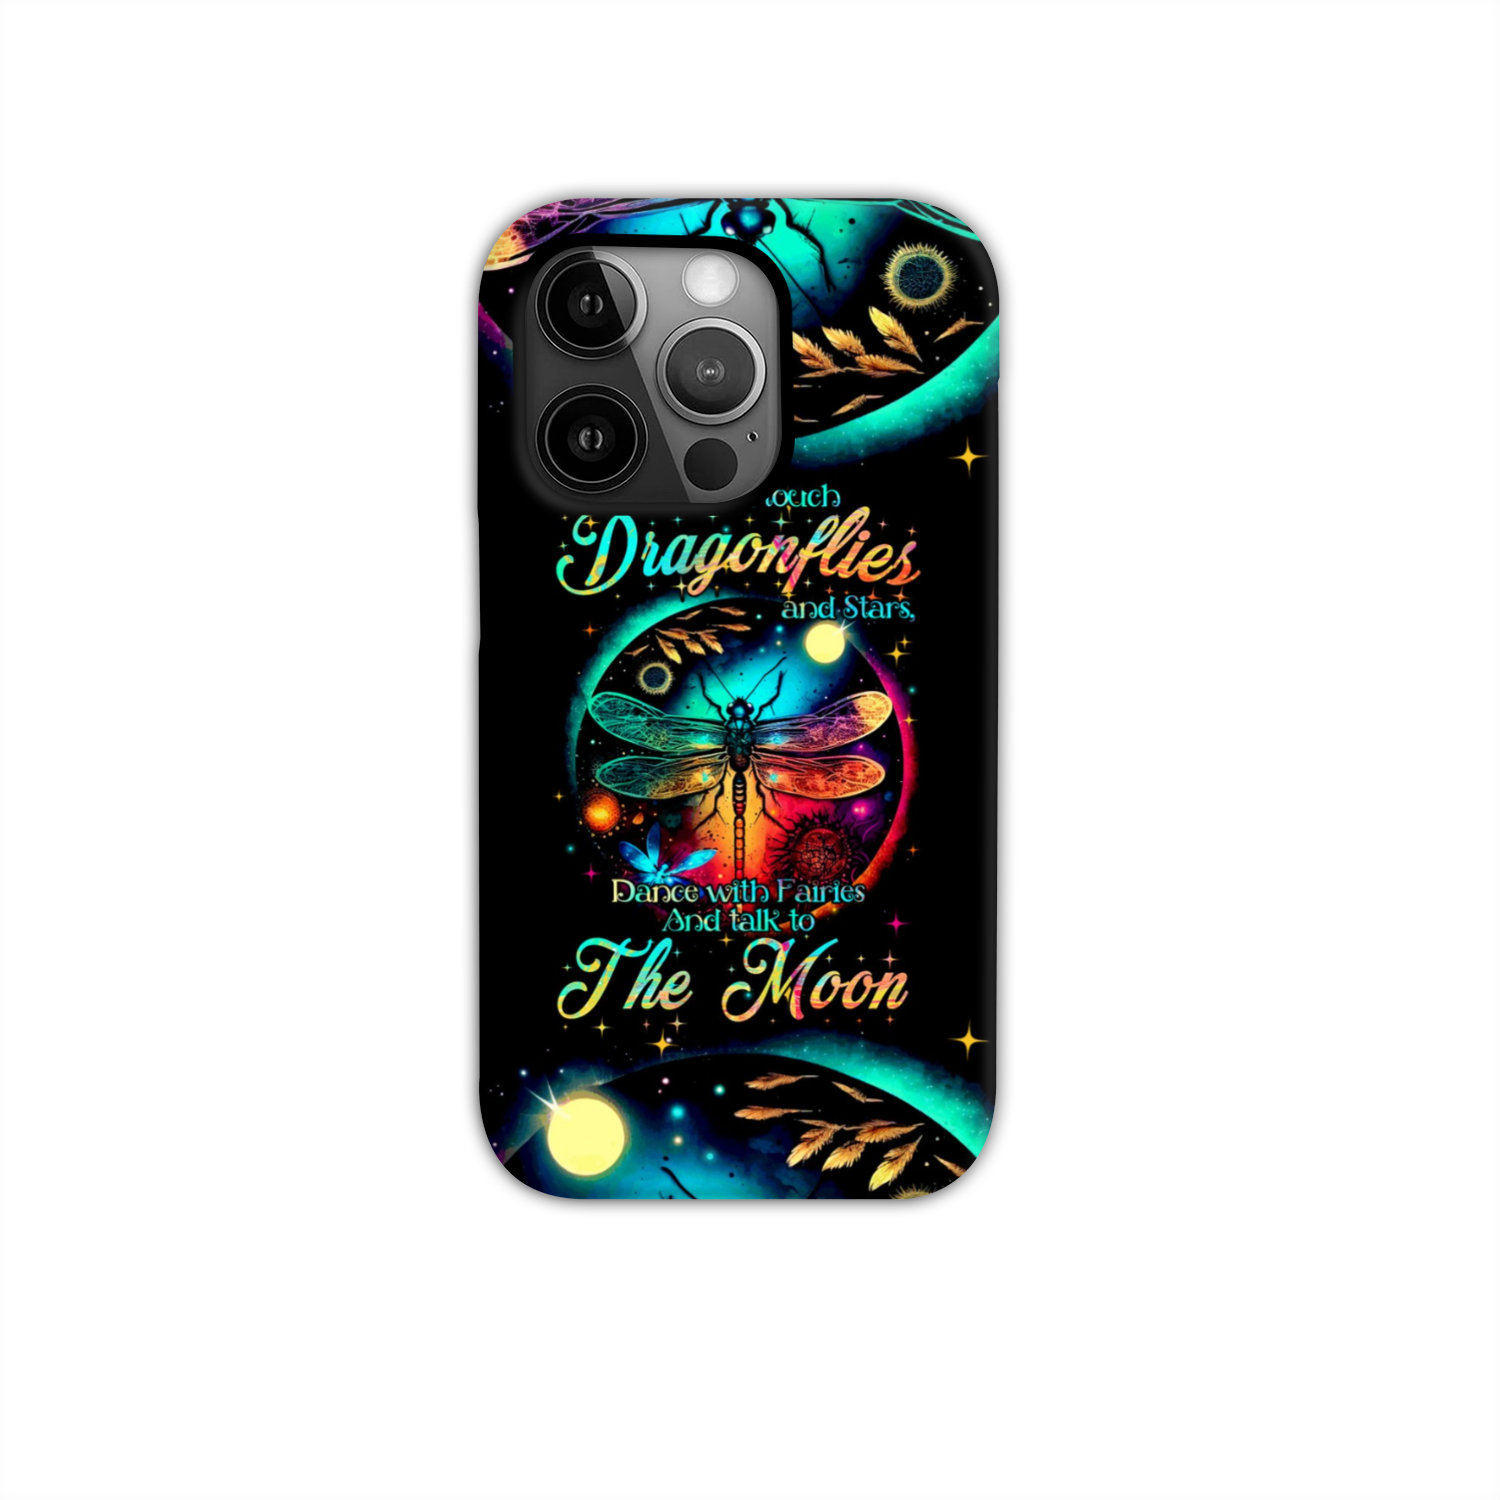 MAY YOU TOUCH DRAGONFLIES AND STARS PHONE CASE - TYTM0504231